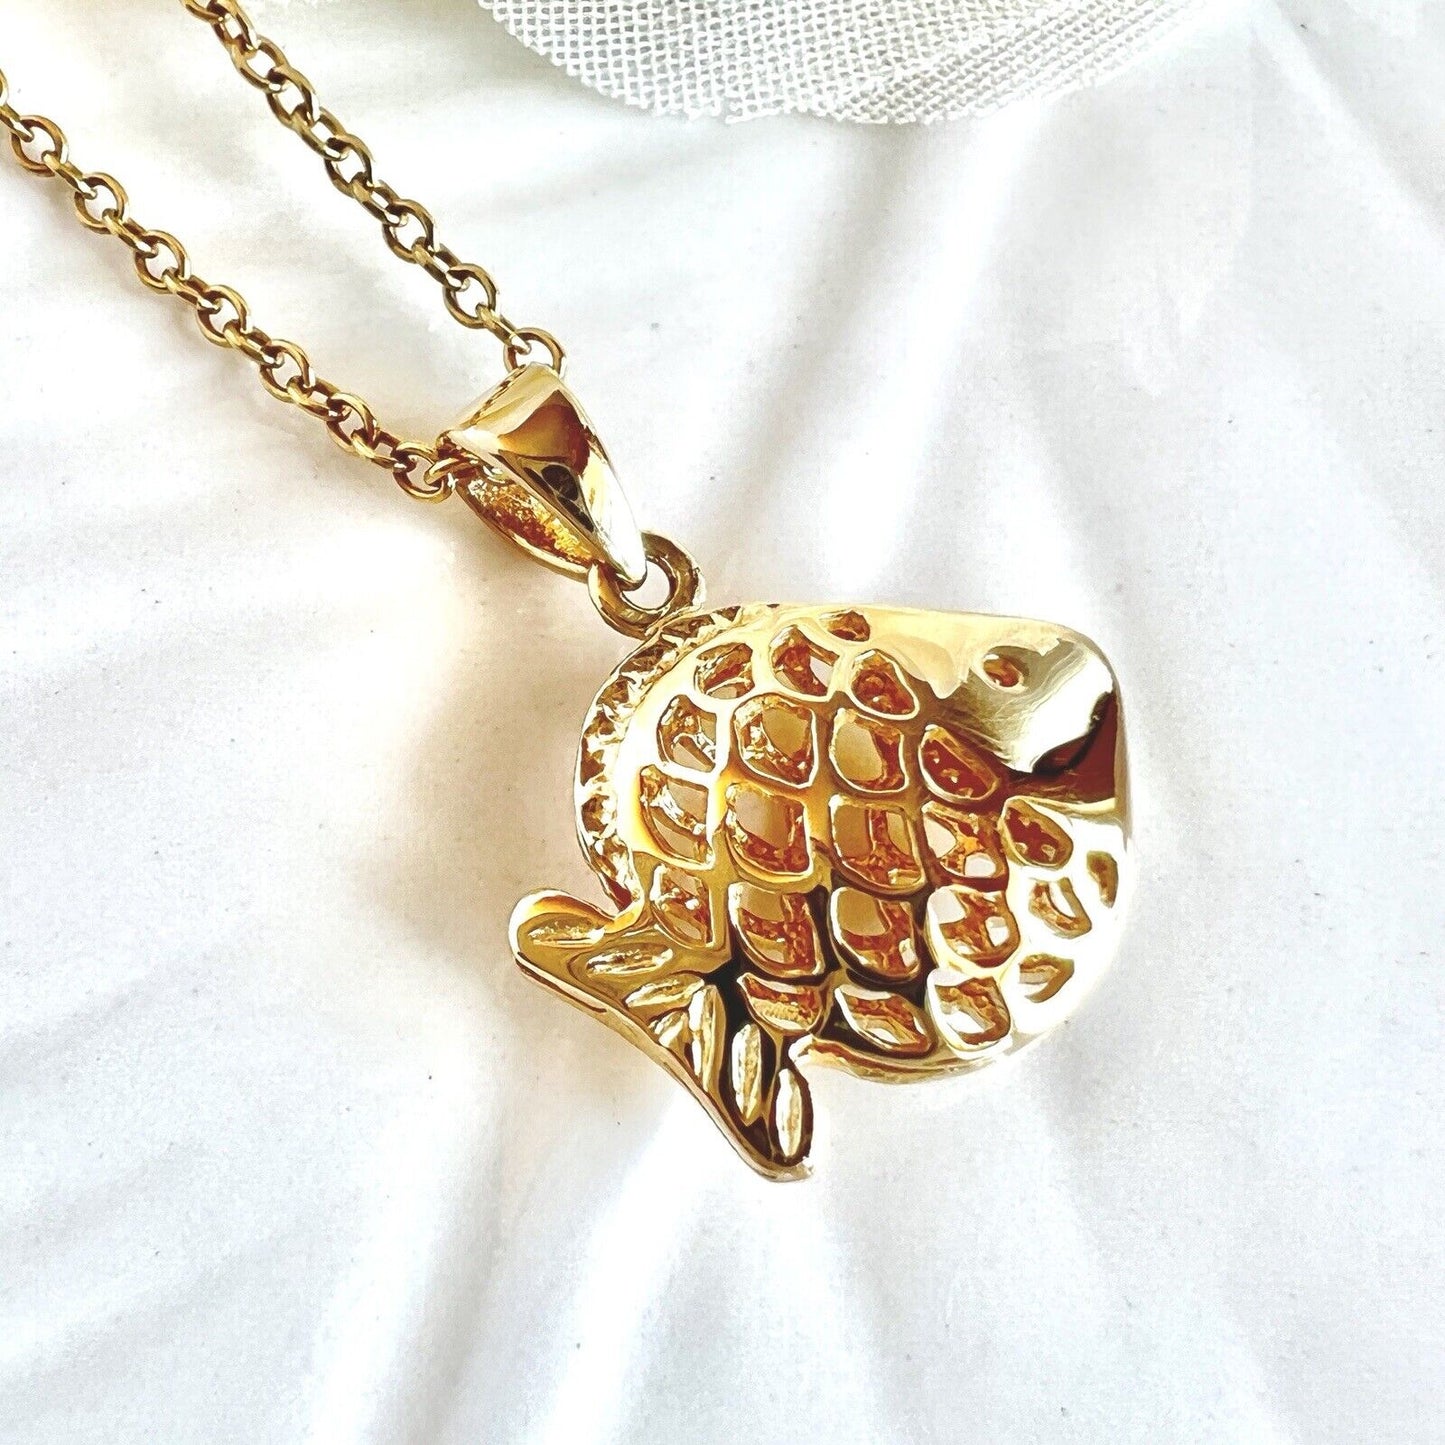 Adorable Solid 14k Yellow Gold Puffy 3-D Fish Pendant/Charm, New, 0.70"